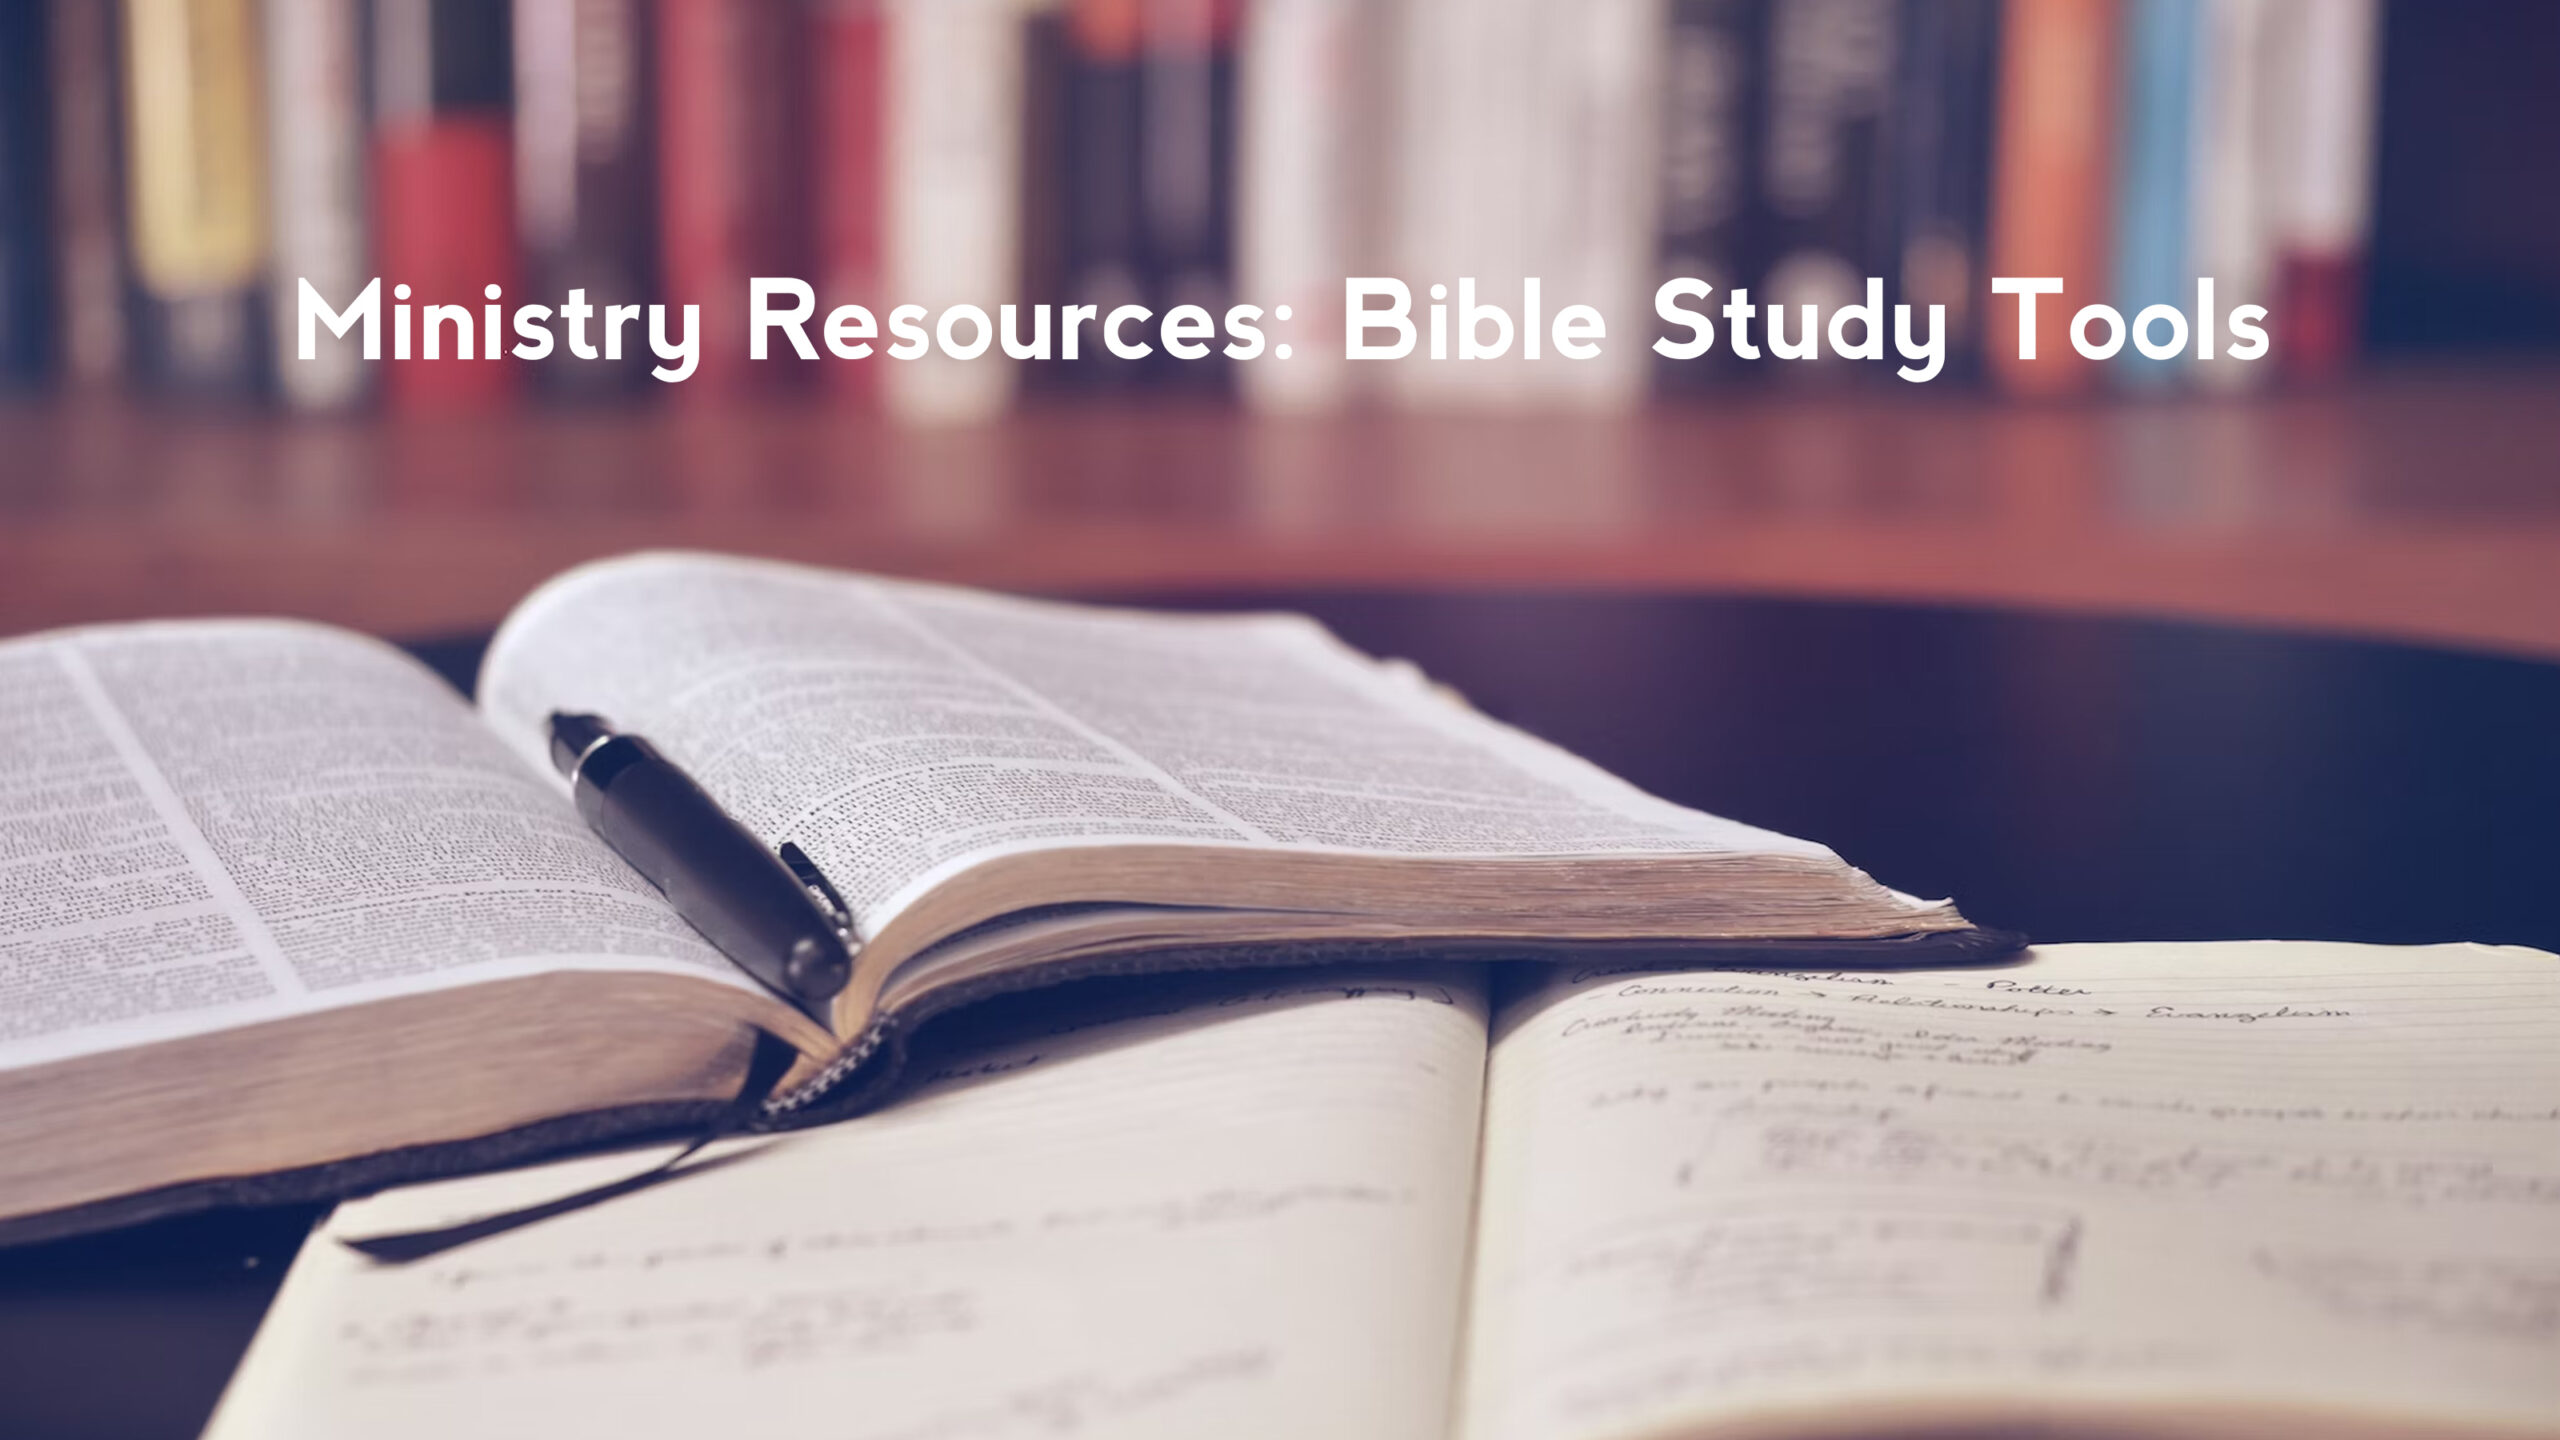 Ministry Resources: Bible Study Tools